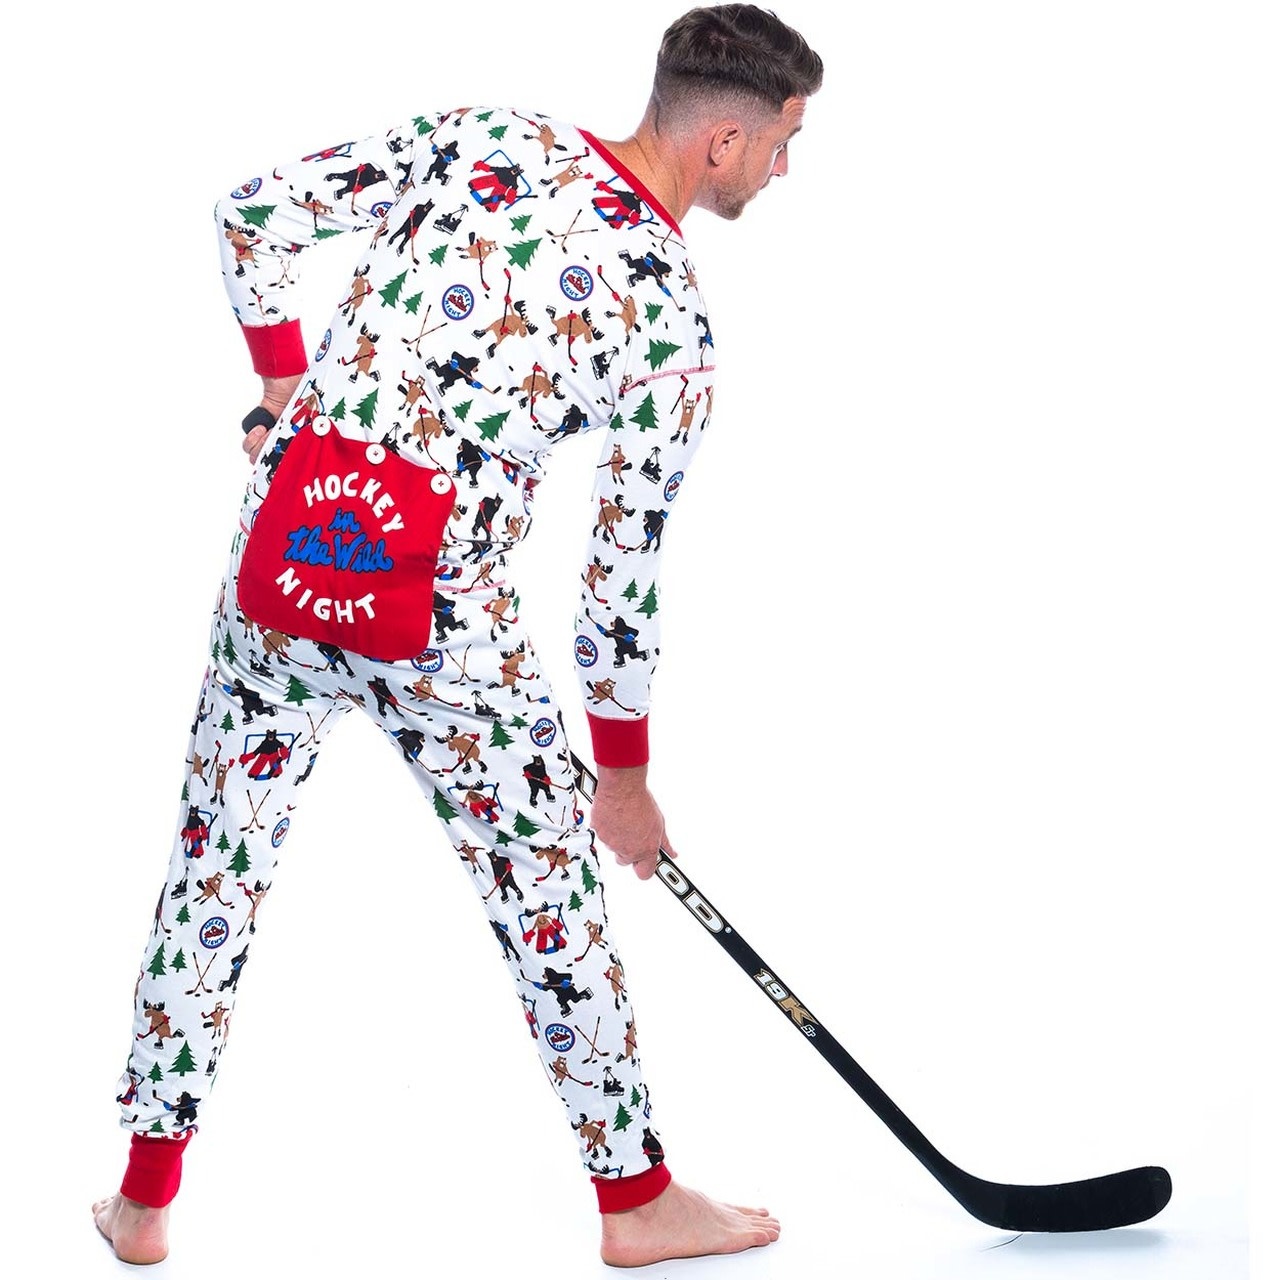 Hockey Night In The Wild Adult Union Suit